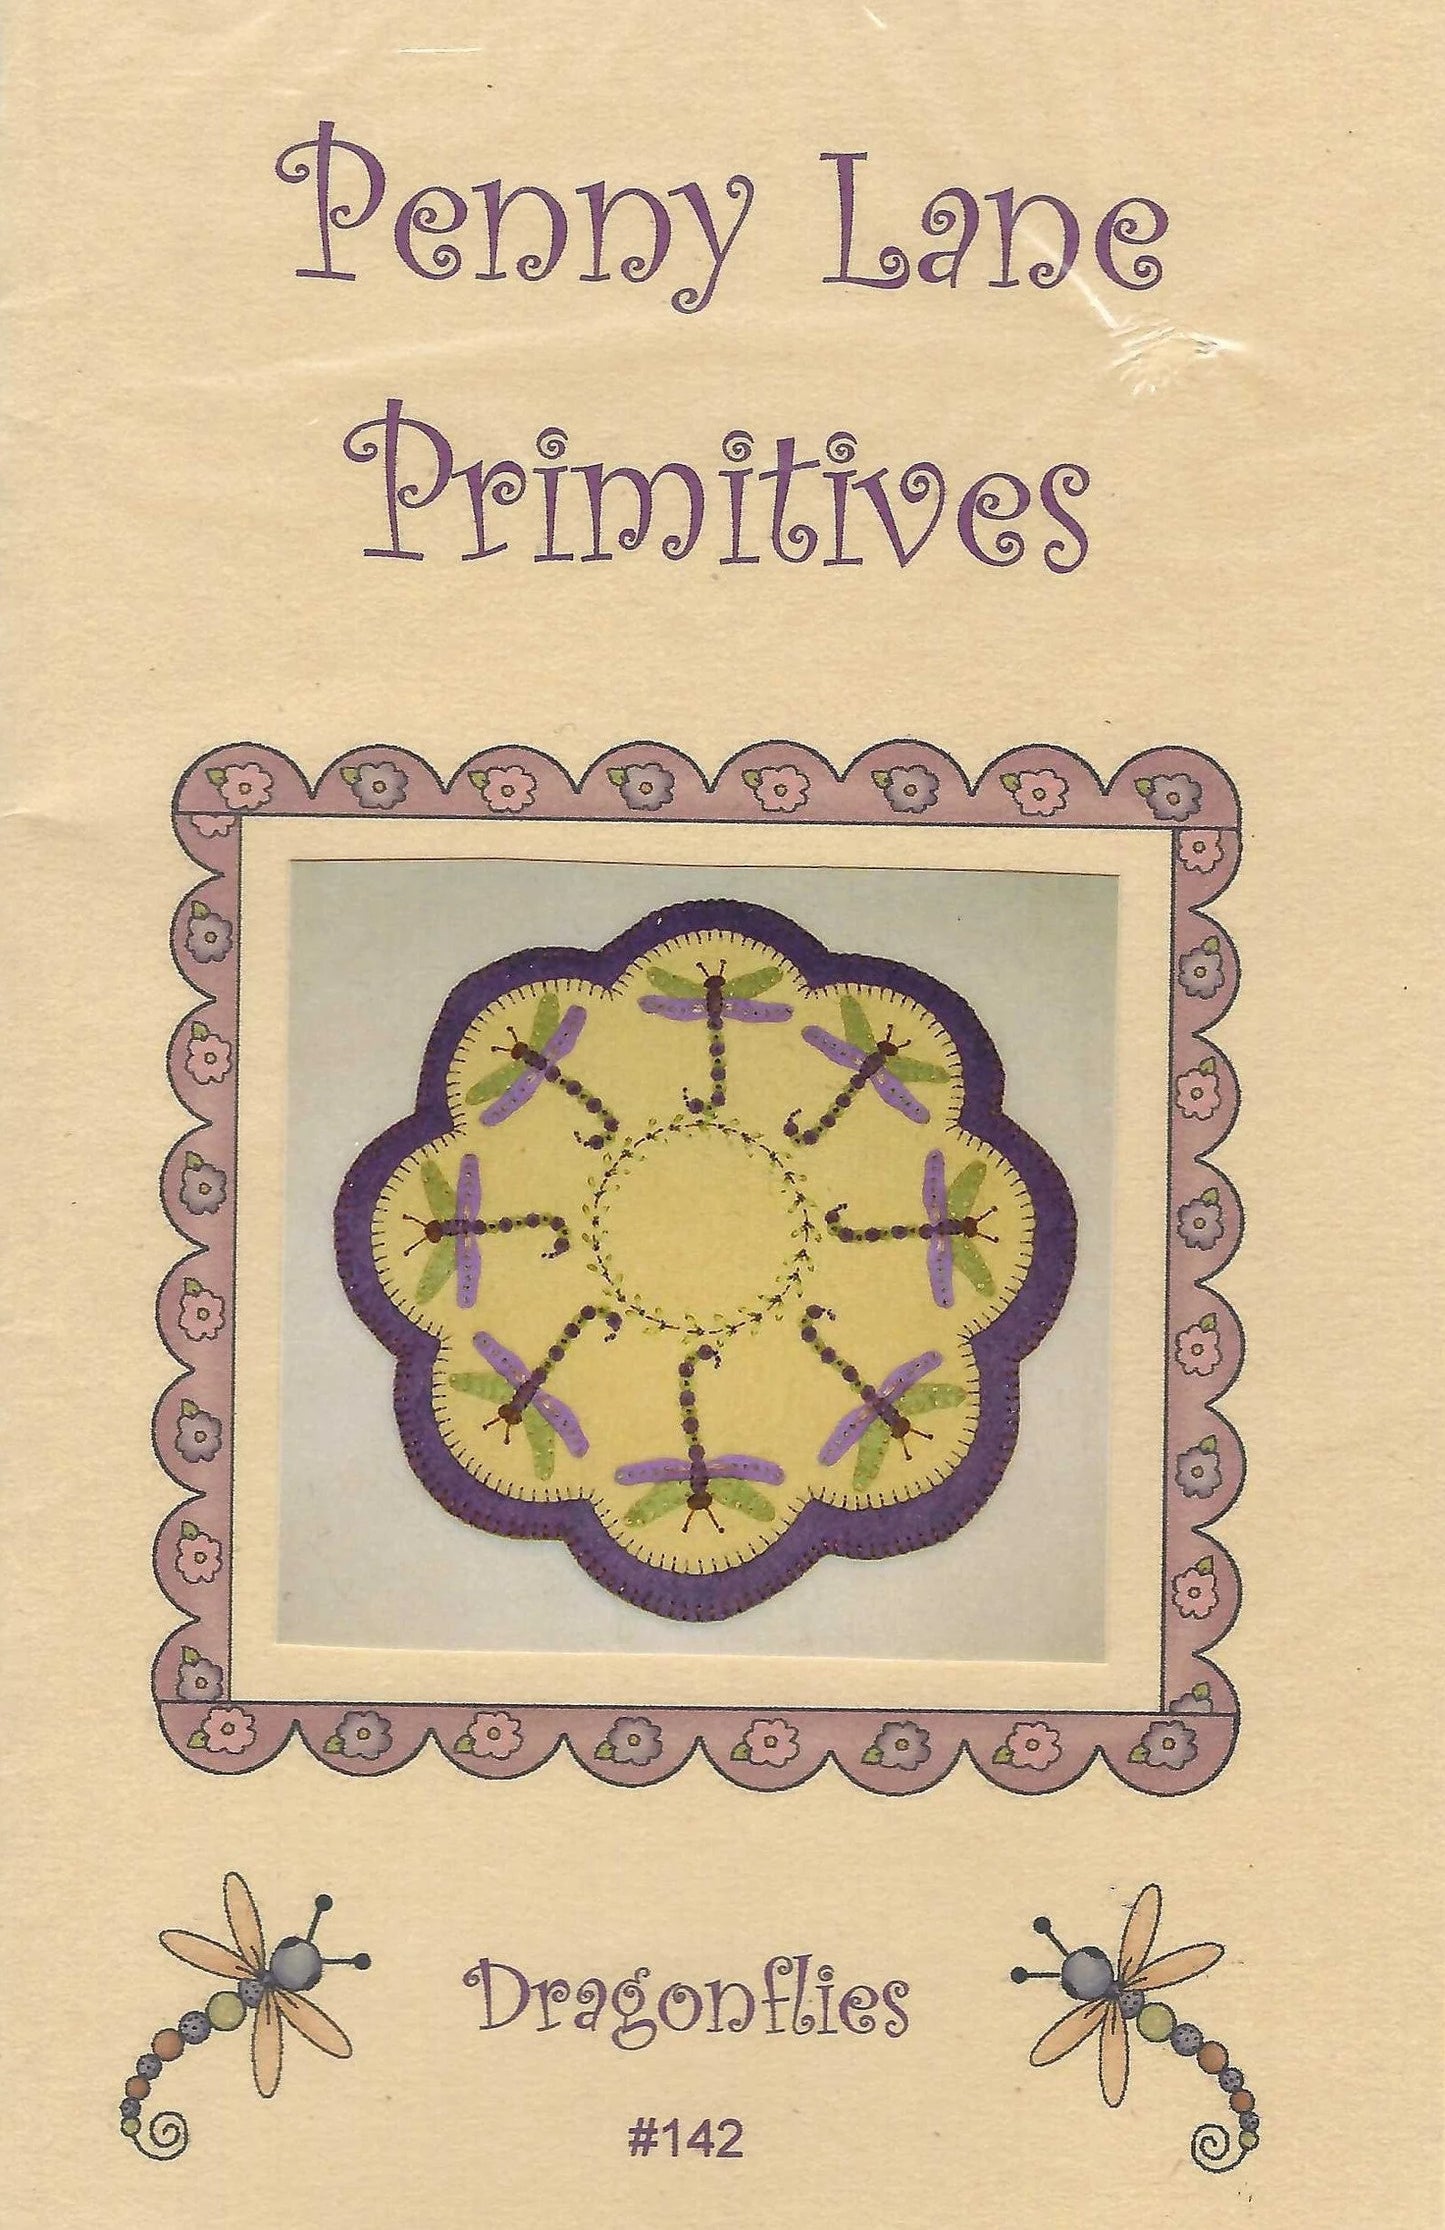 Dragonflies Candle Mat by Penny Lane Primitives